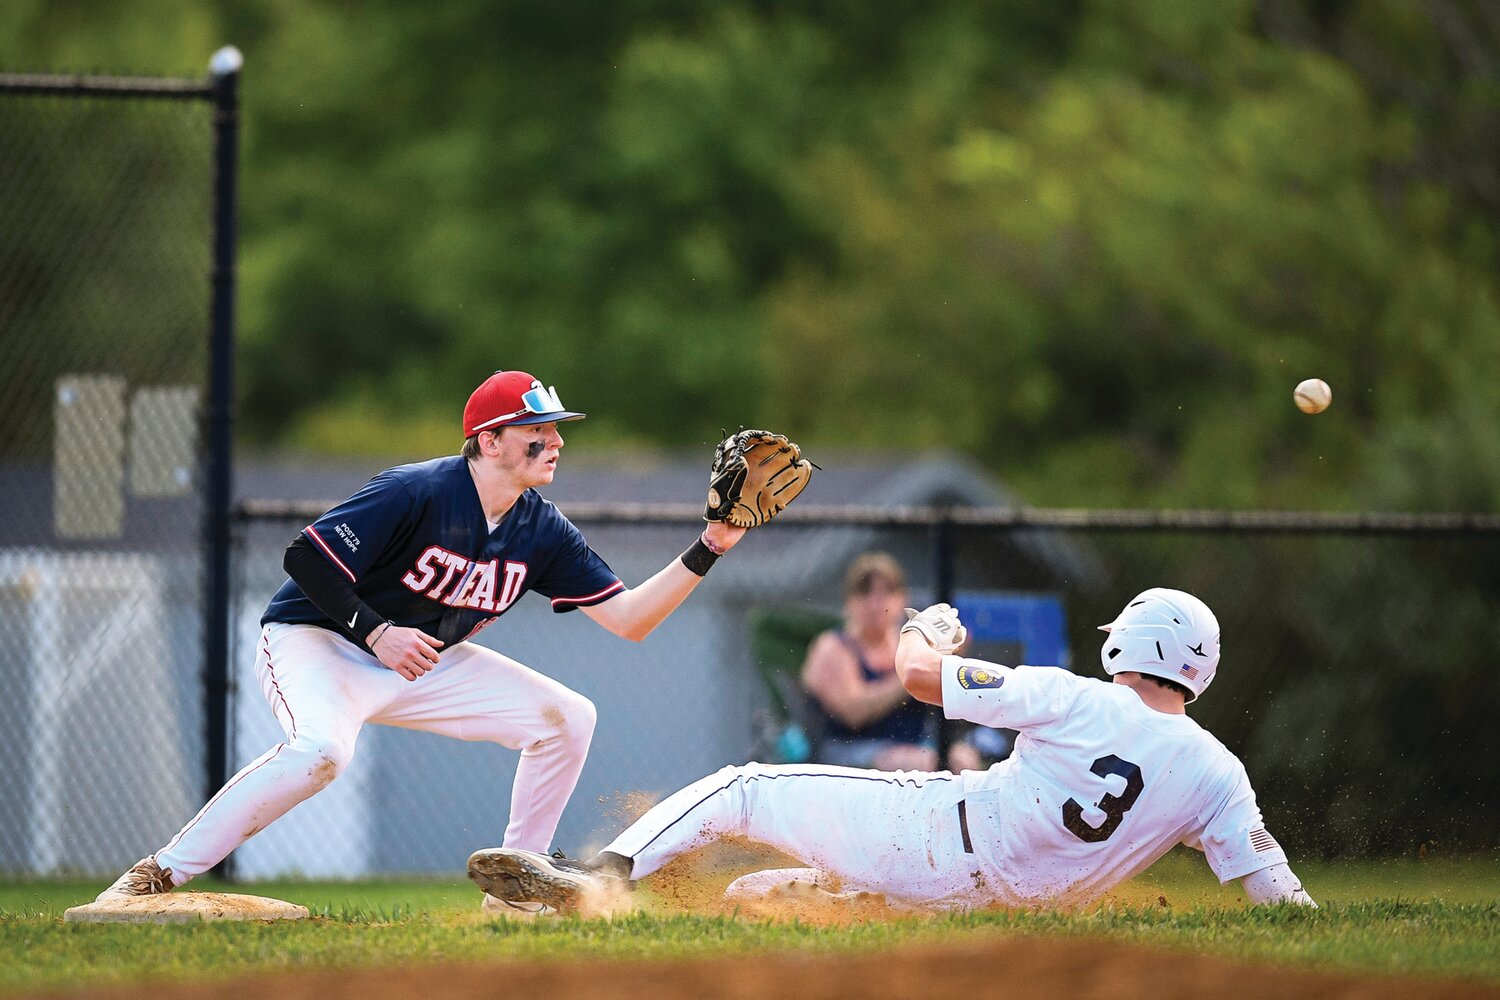 Doylestown’s Connor Grzywacz slides in ahead of the throw with a triple as Plumstead’s Chase Kimbel waits for the ball.